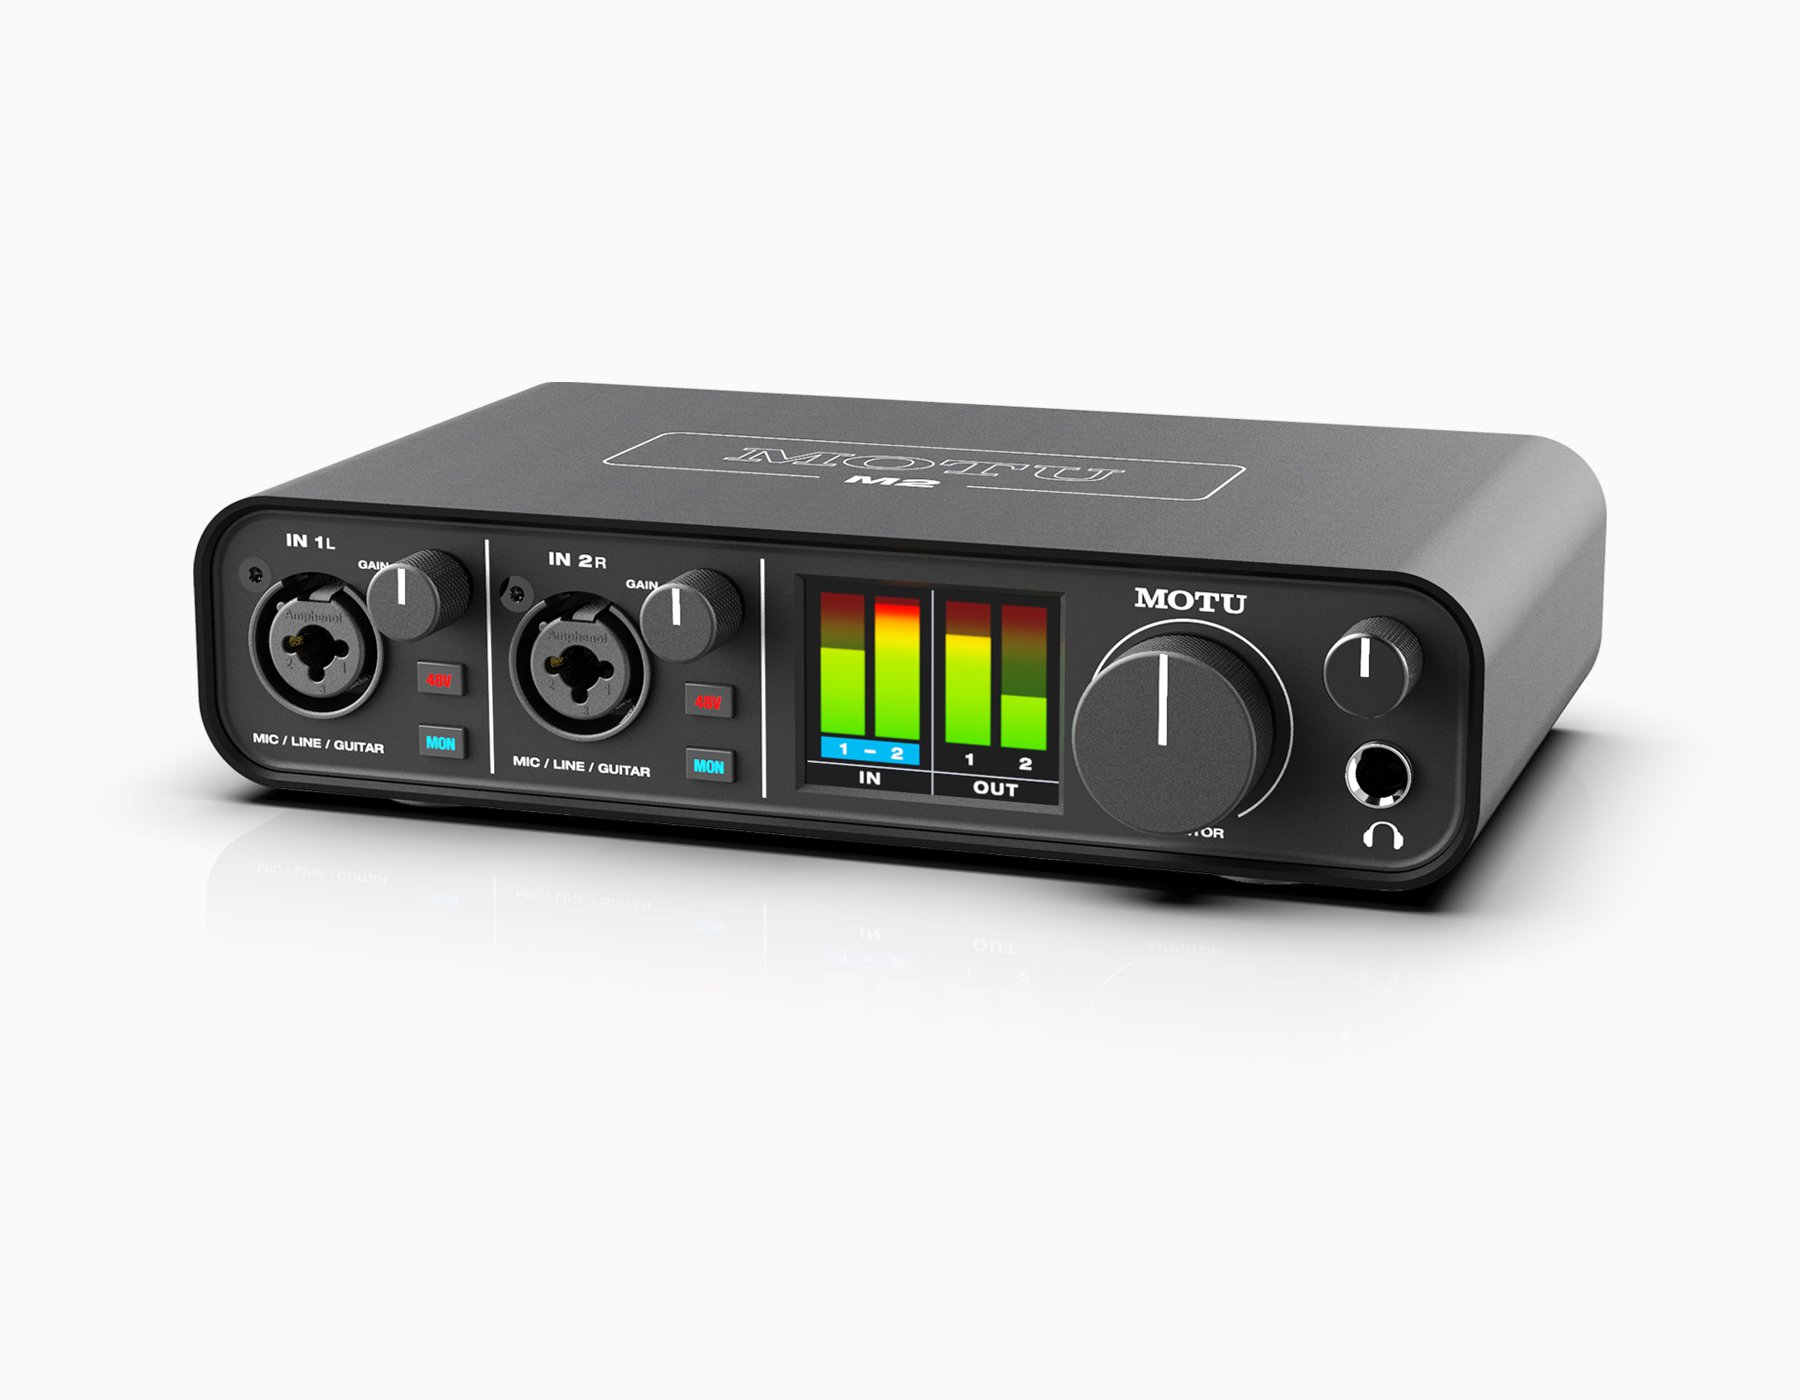 Top Audio Interface Review: Find the Perfect Choice for Your Needs